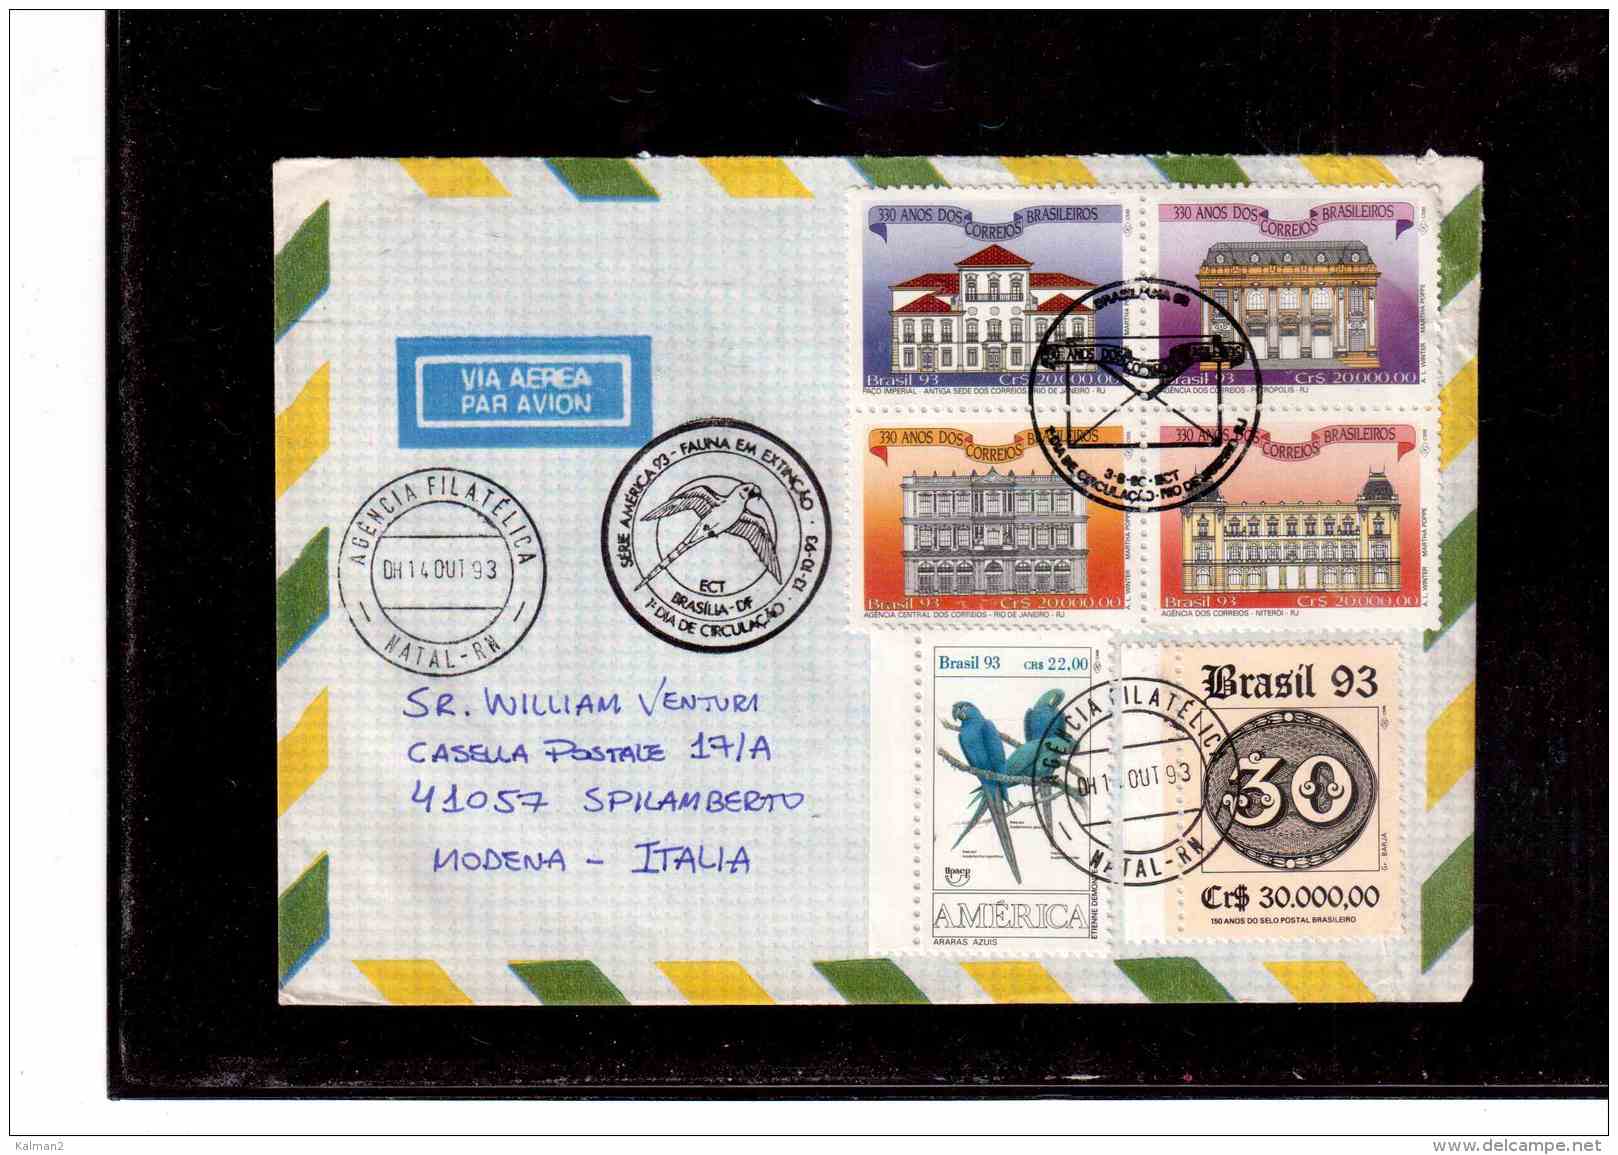 TEM8806   -  POSTAL HISTORY    "  BRASIL  "  /    AIR MAIL  LETTER   TO   ITALY - Covers & Documents